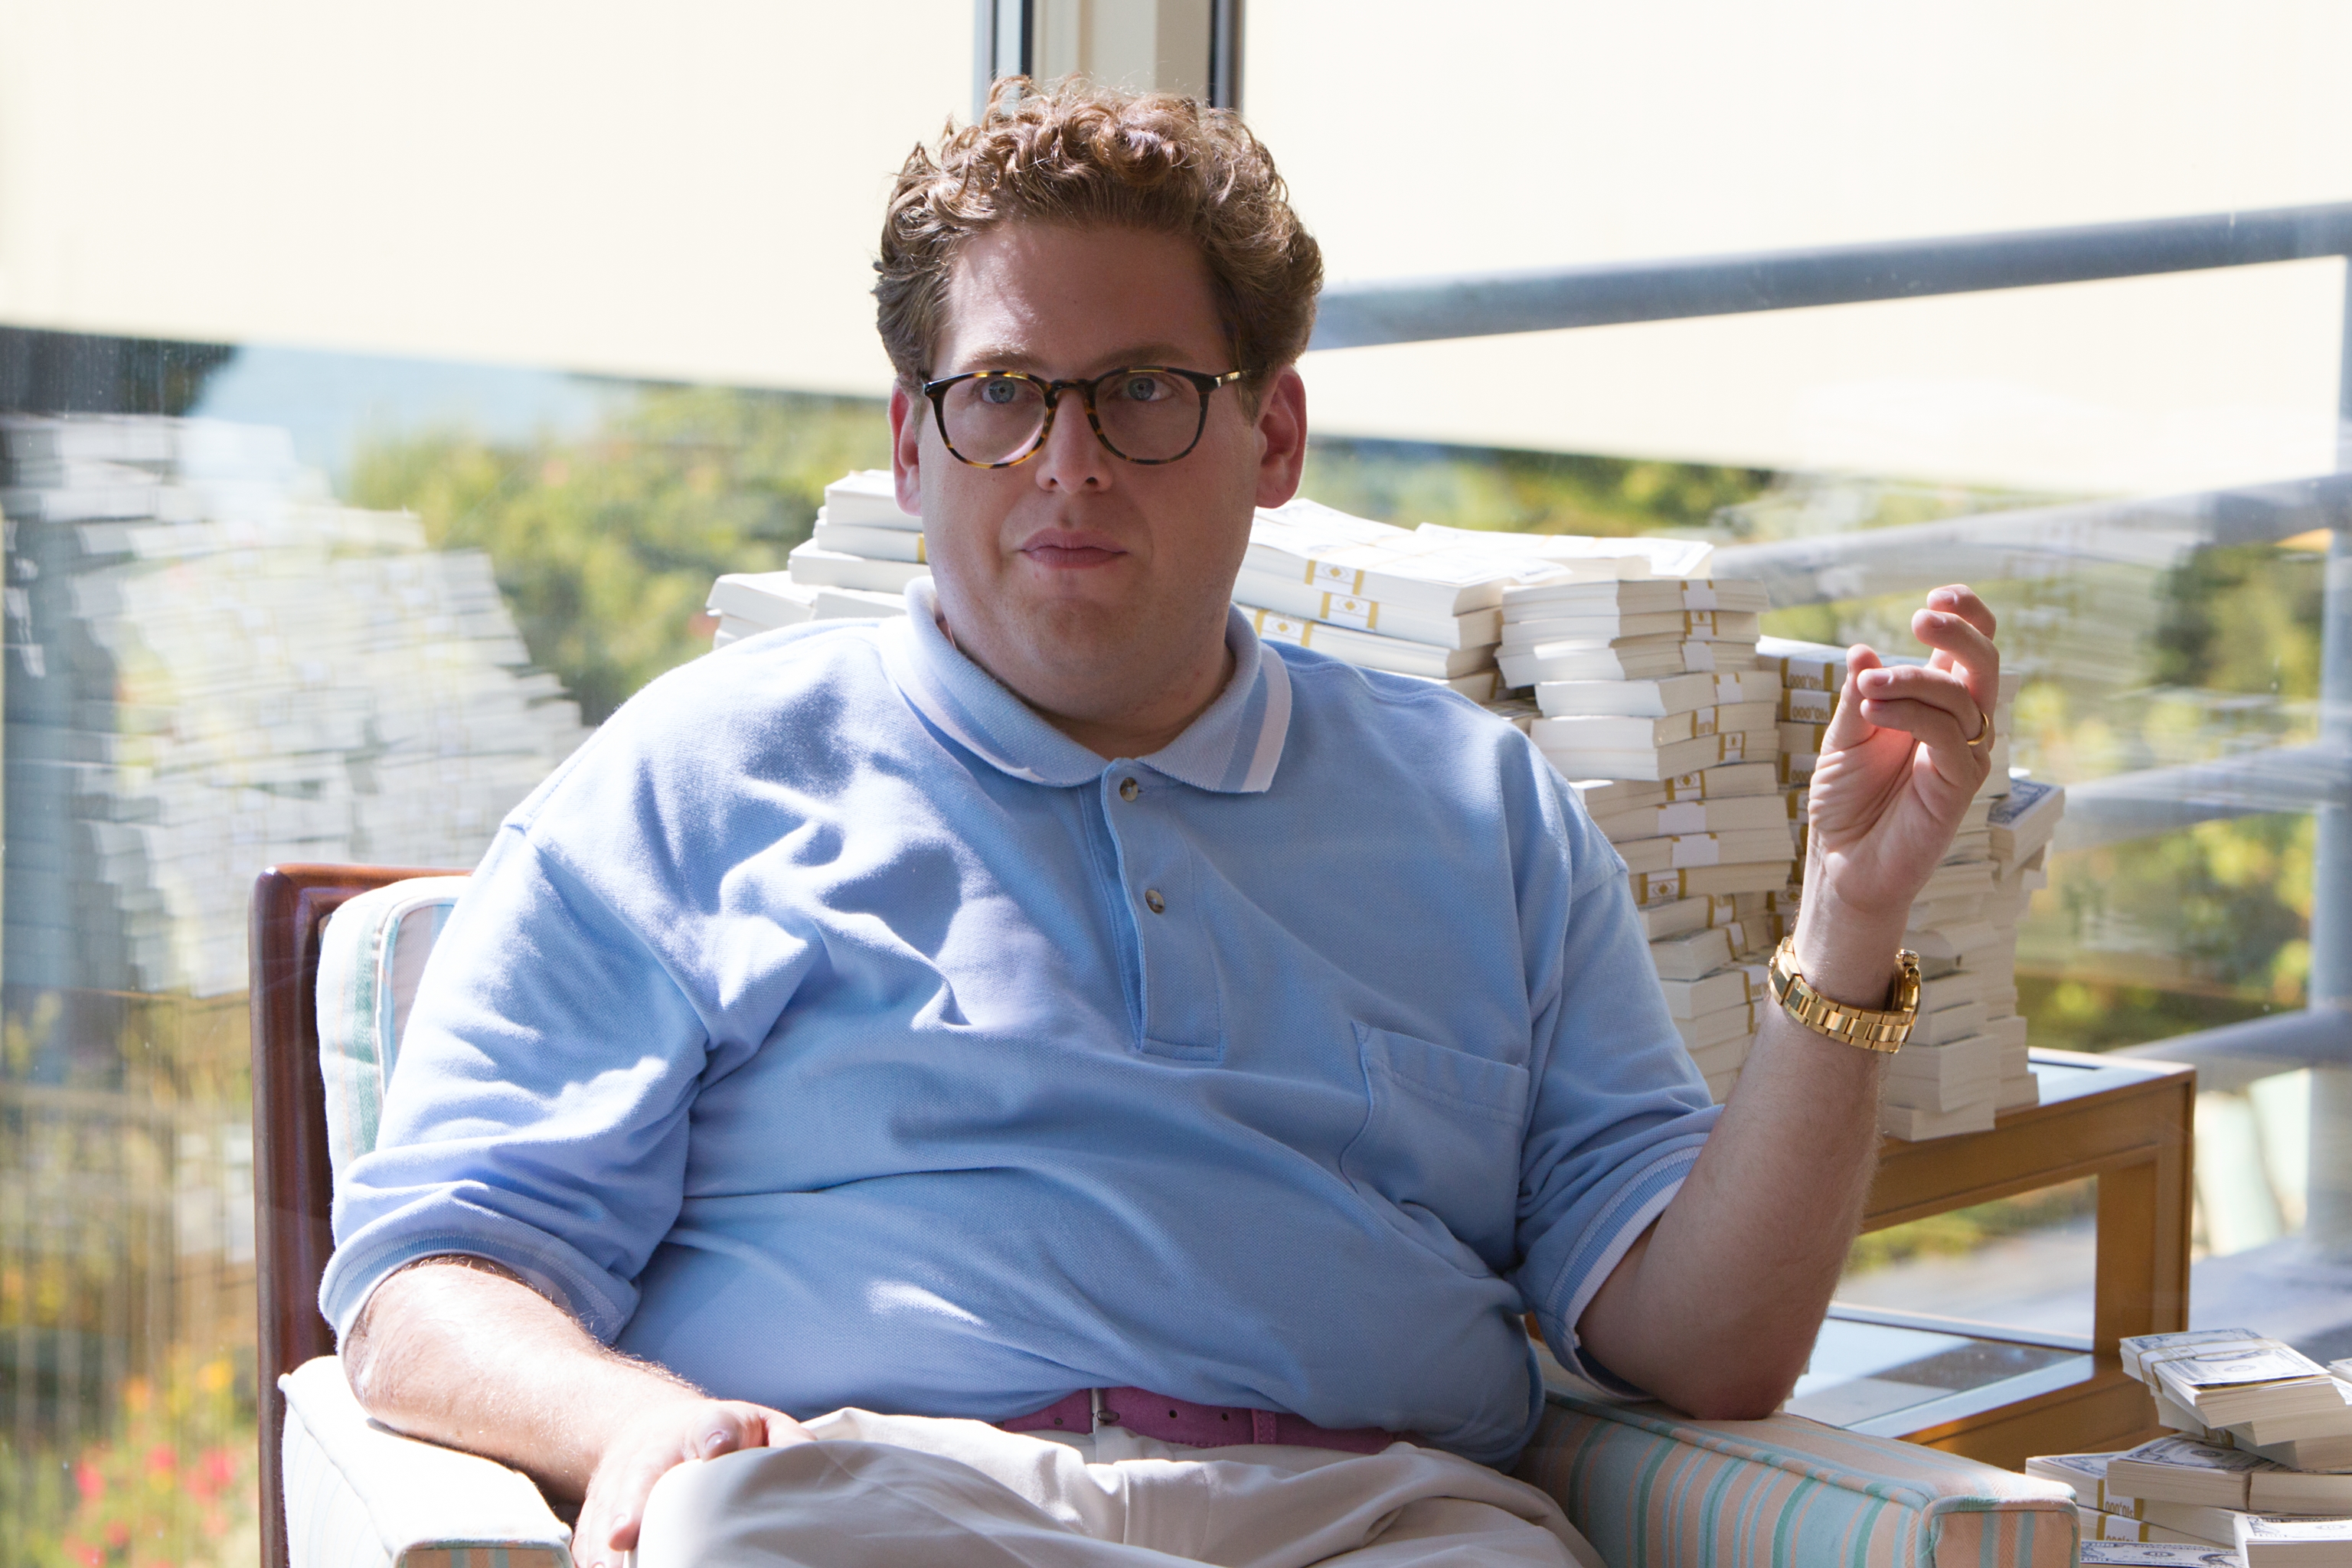 jonah hill, donnie azoff, the wolf of wall street, movie